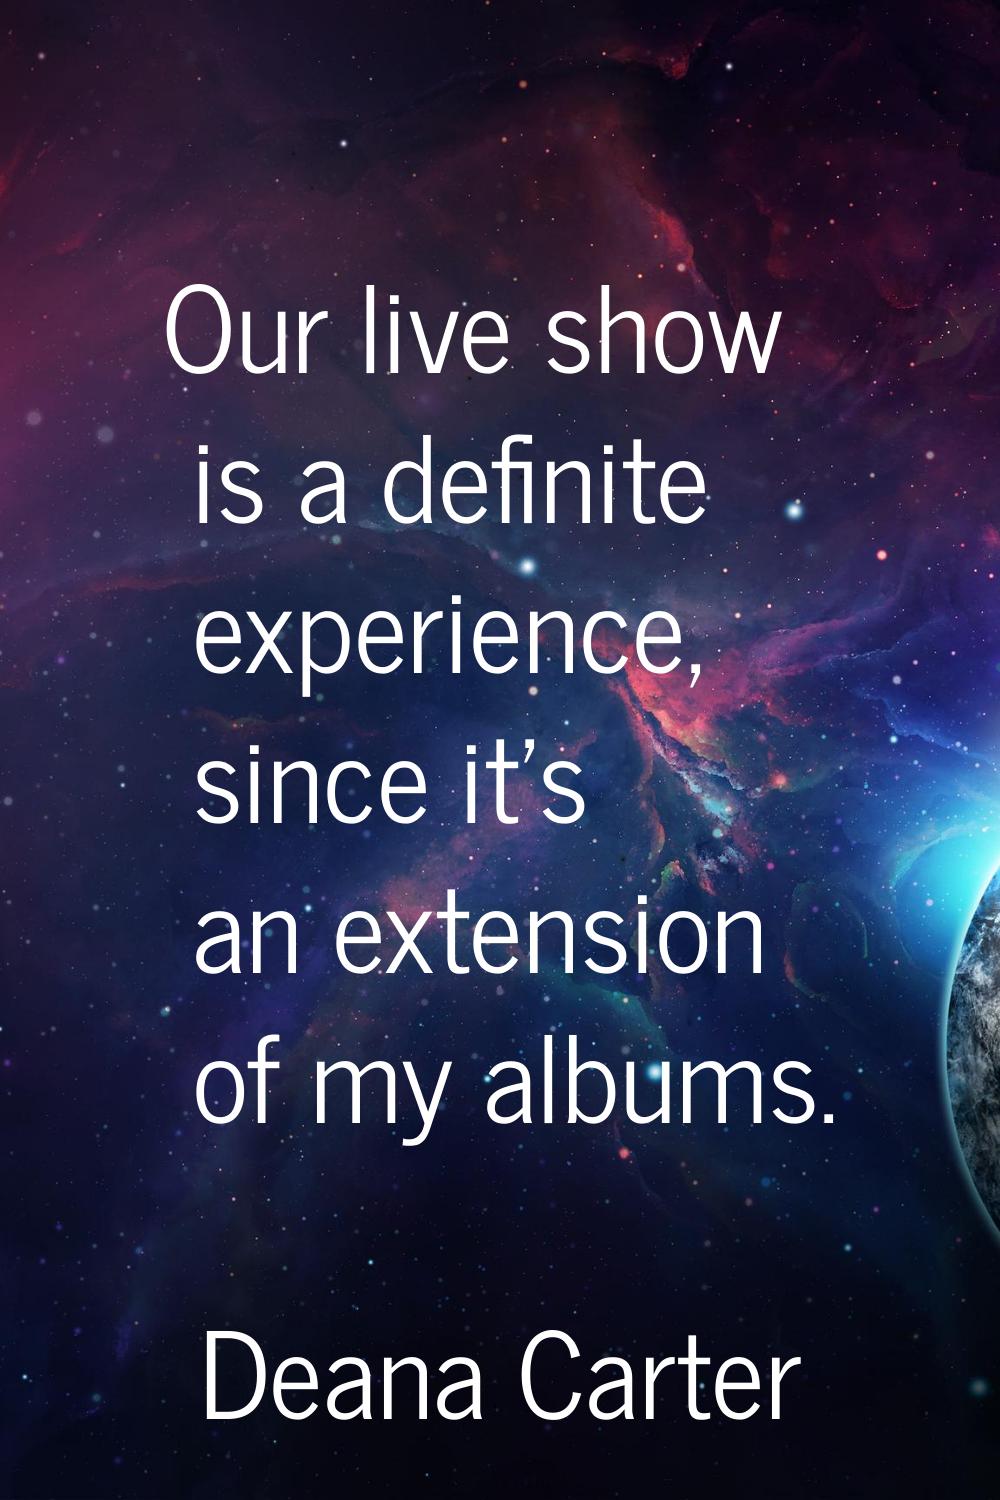 Our live show is a definite experience, since it's an extension of my albums.